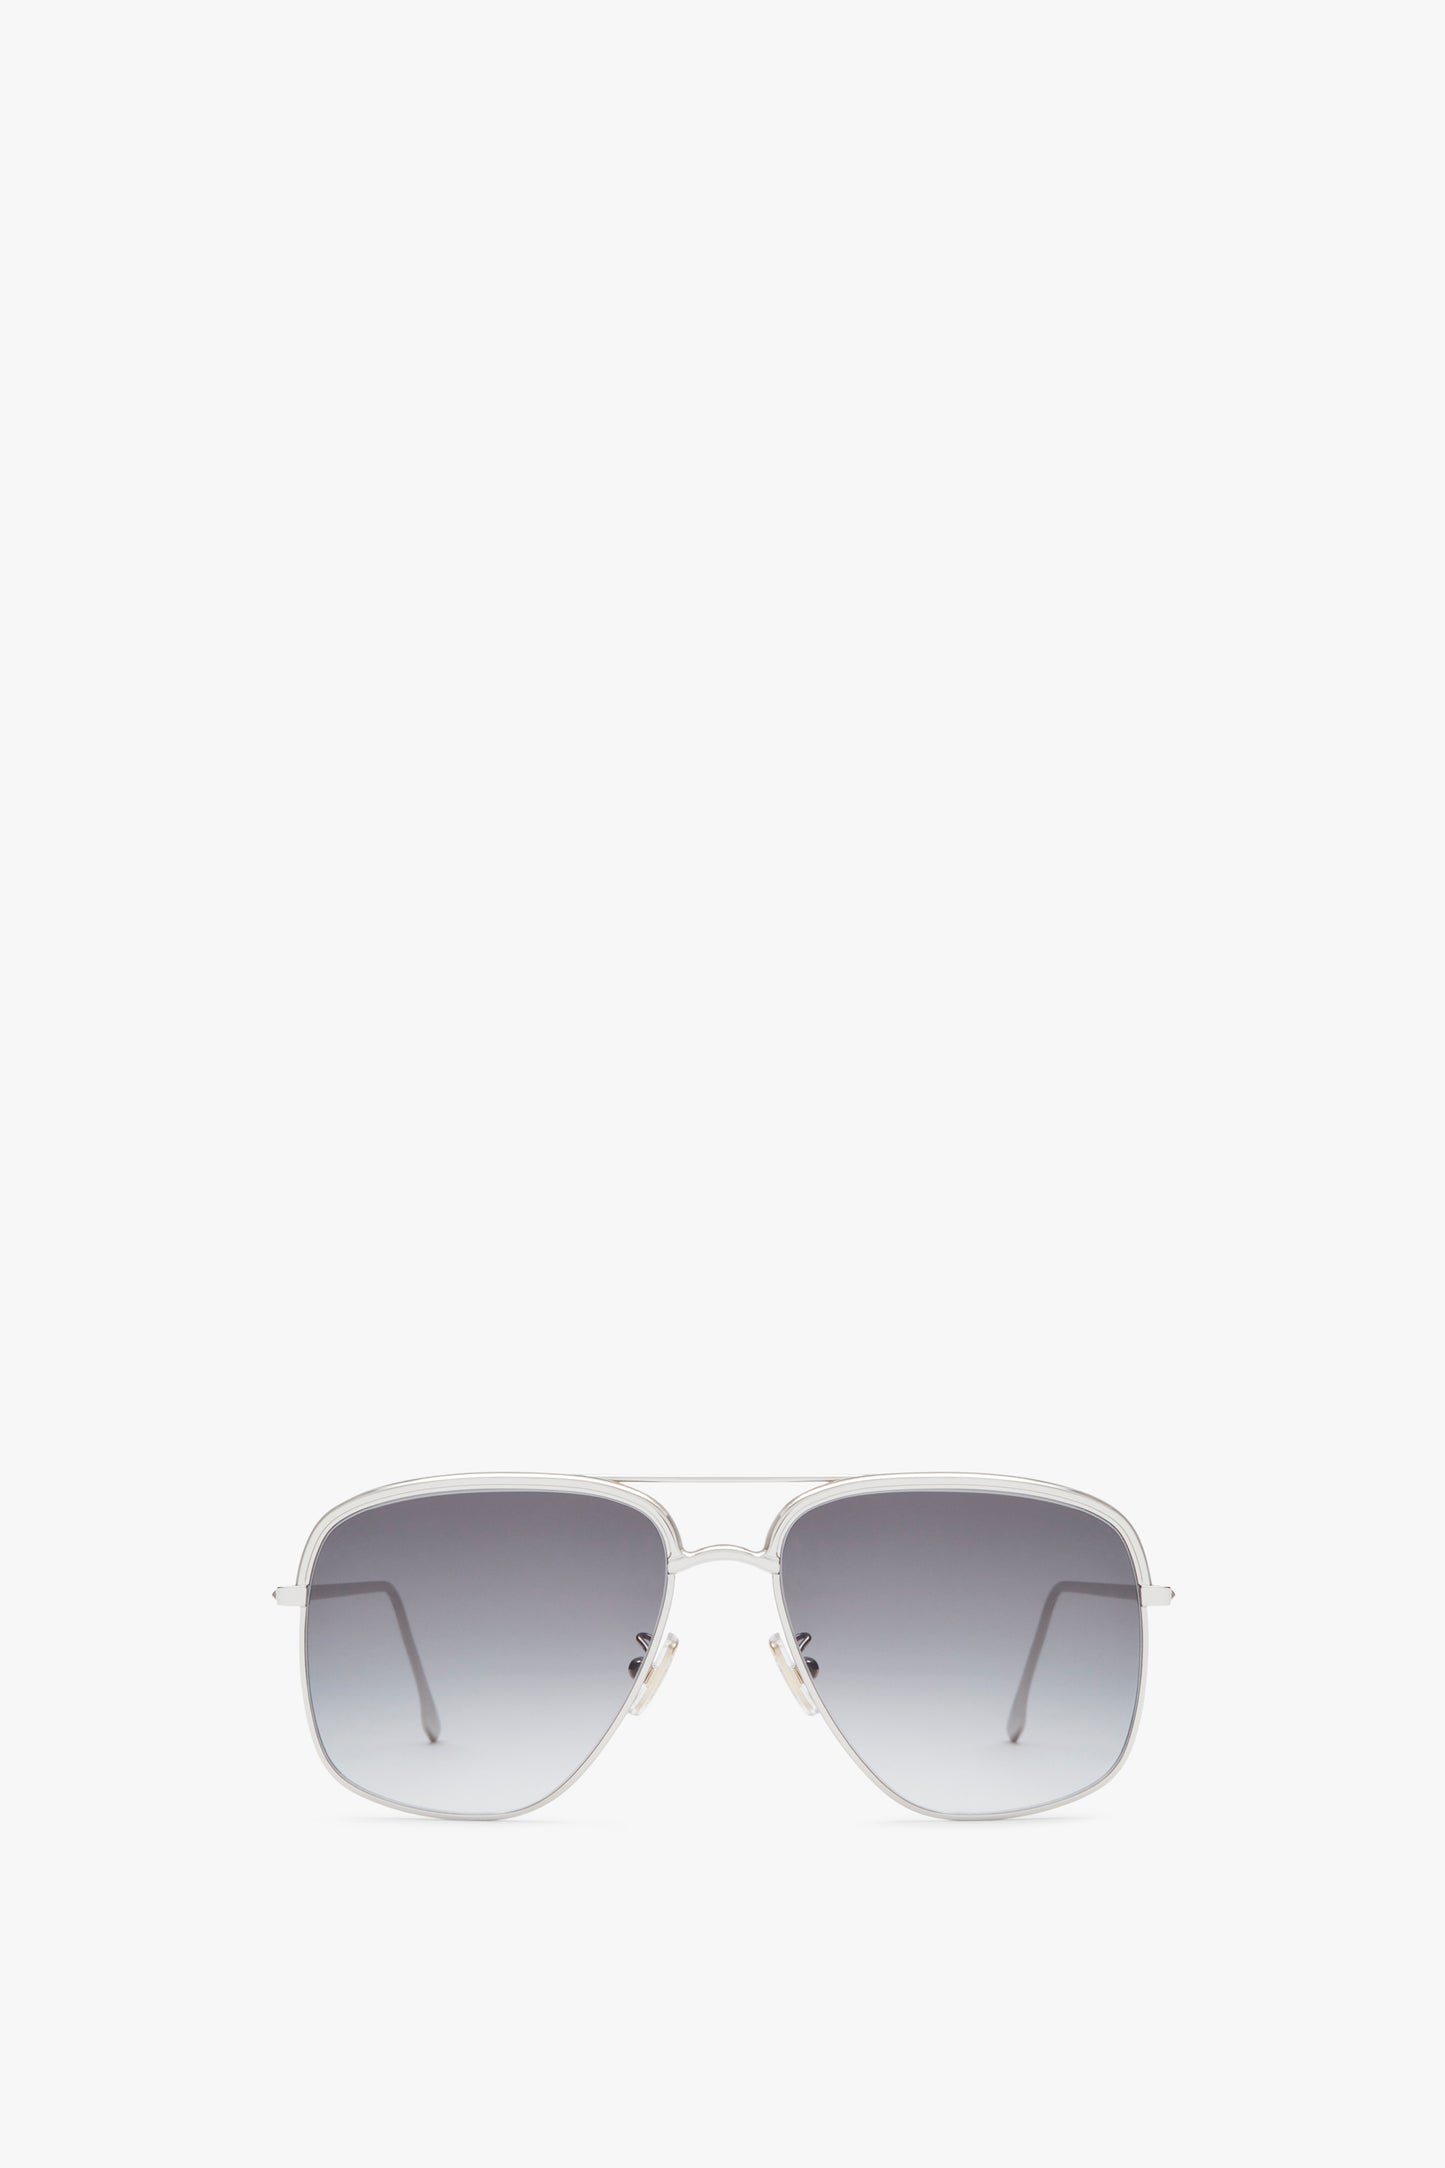 A pair of Double Brow Navigator in Silver with gradient Zeiss lenses and a metal frame by Victoria Beckham, handcrafted in Italy, shown on a white background.